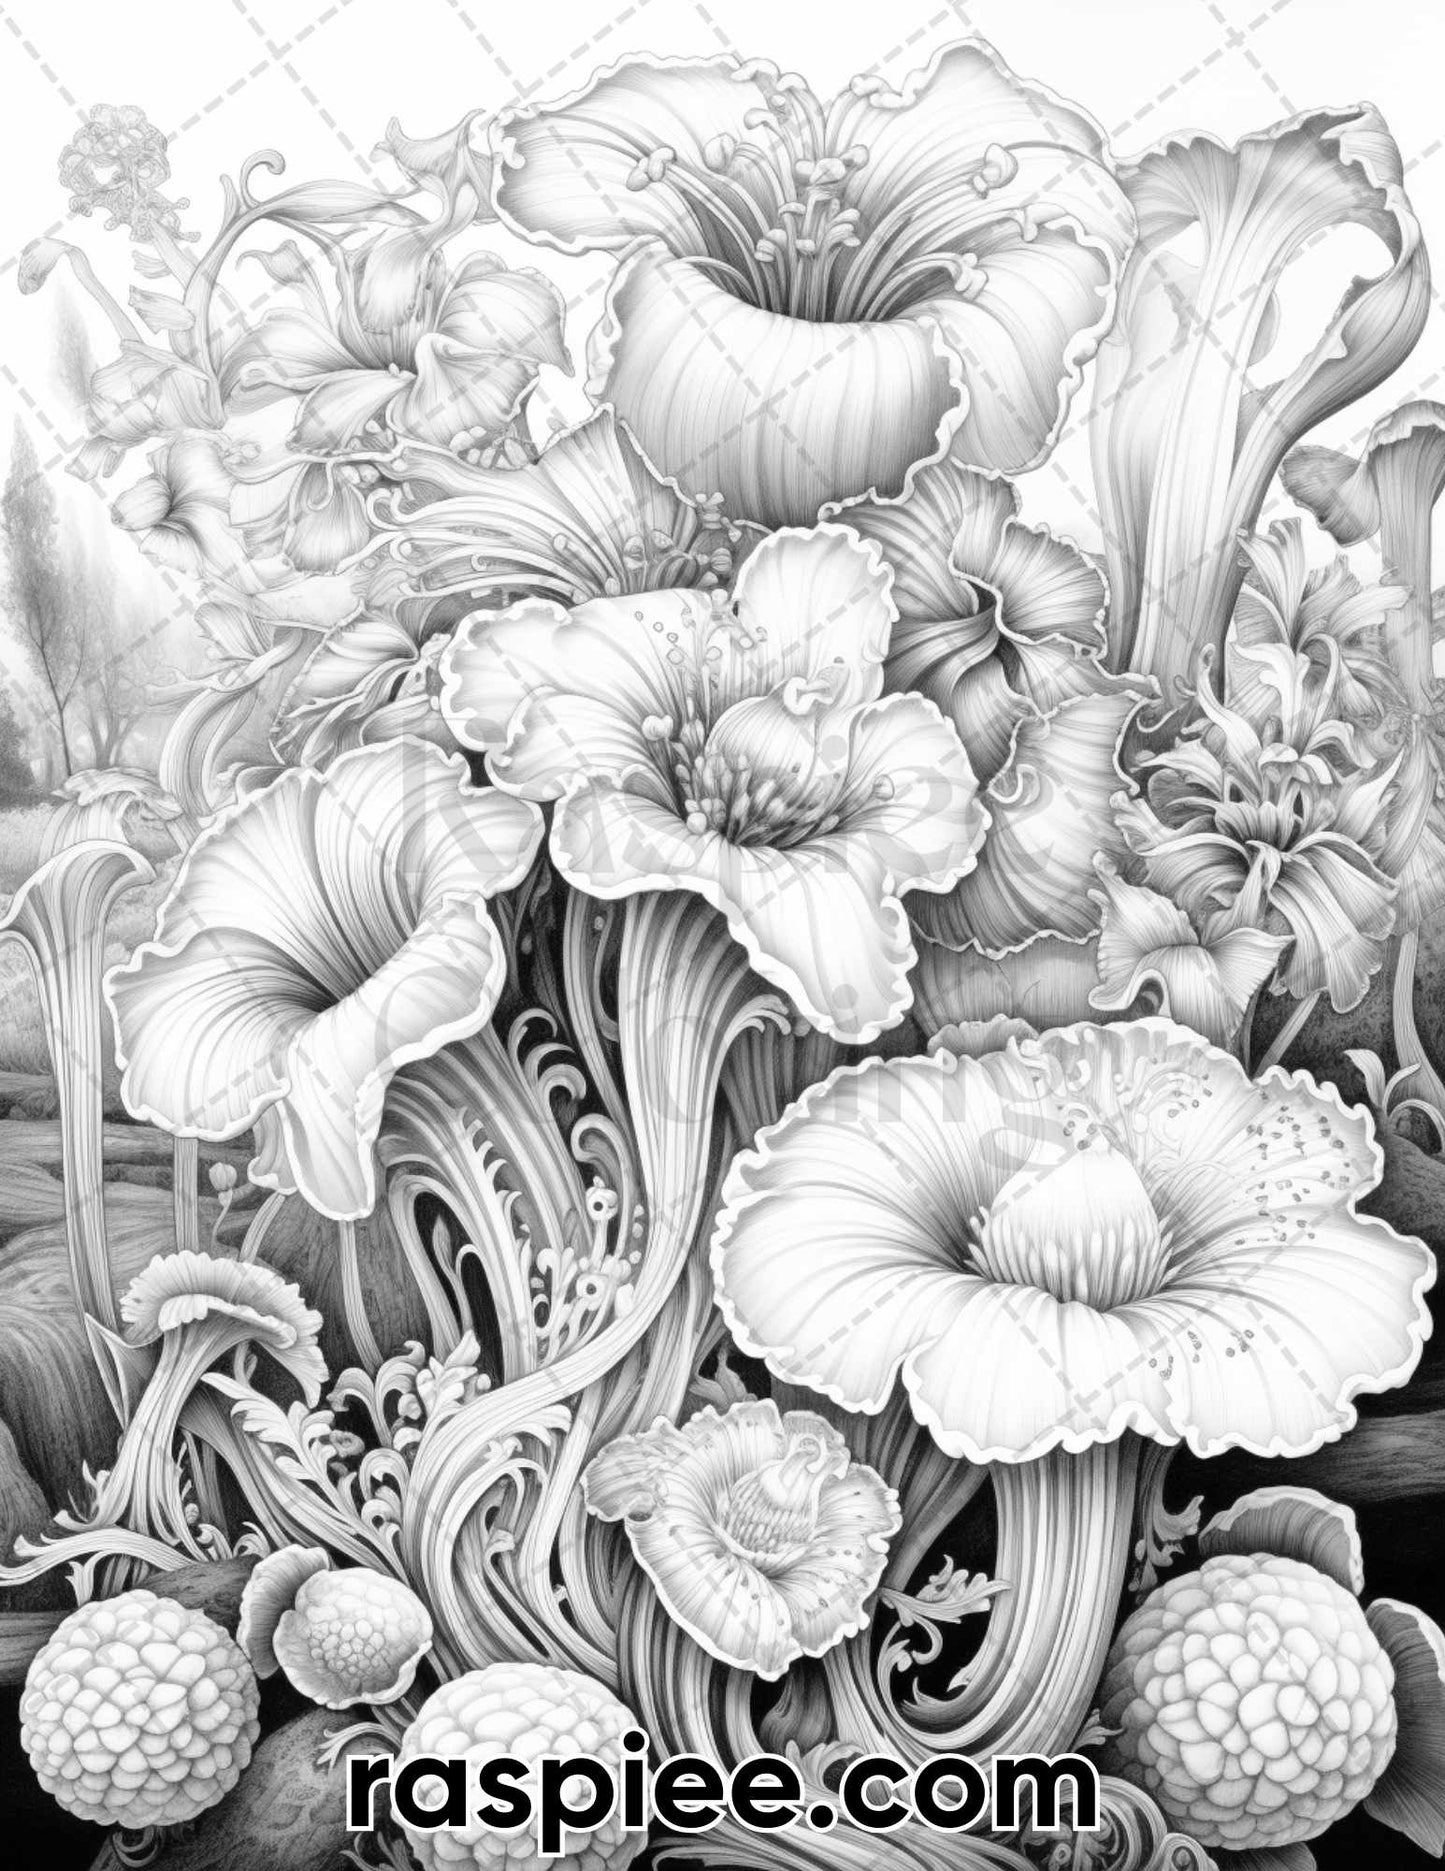 55 Fantasy Flowers Grayscale Coloring Pages for Adults, Printable PDF File Instant Download